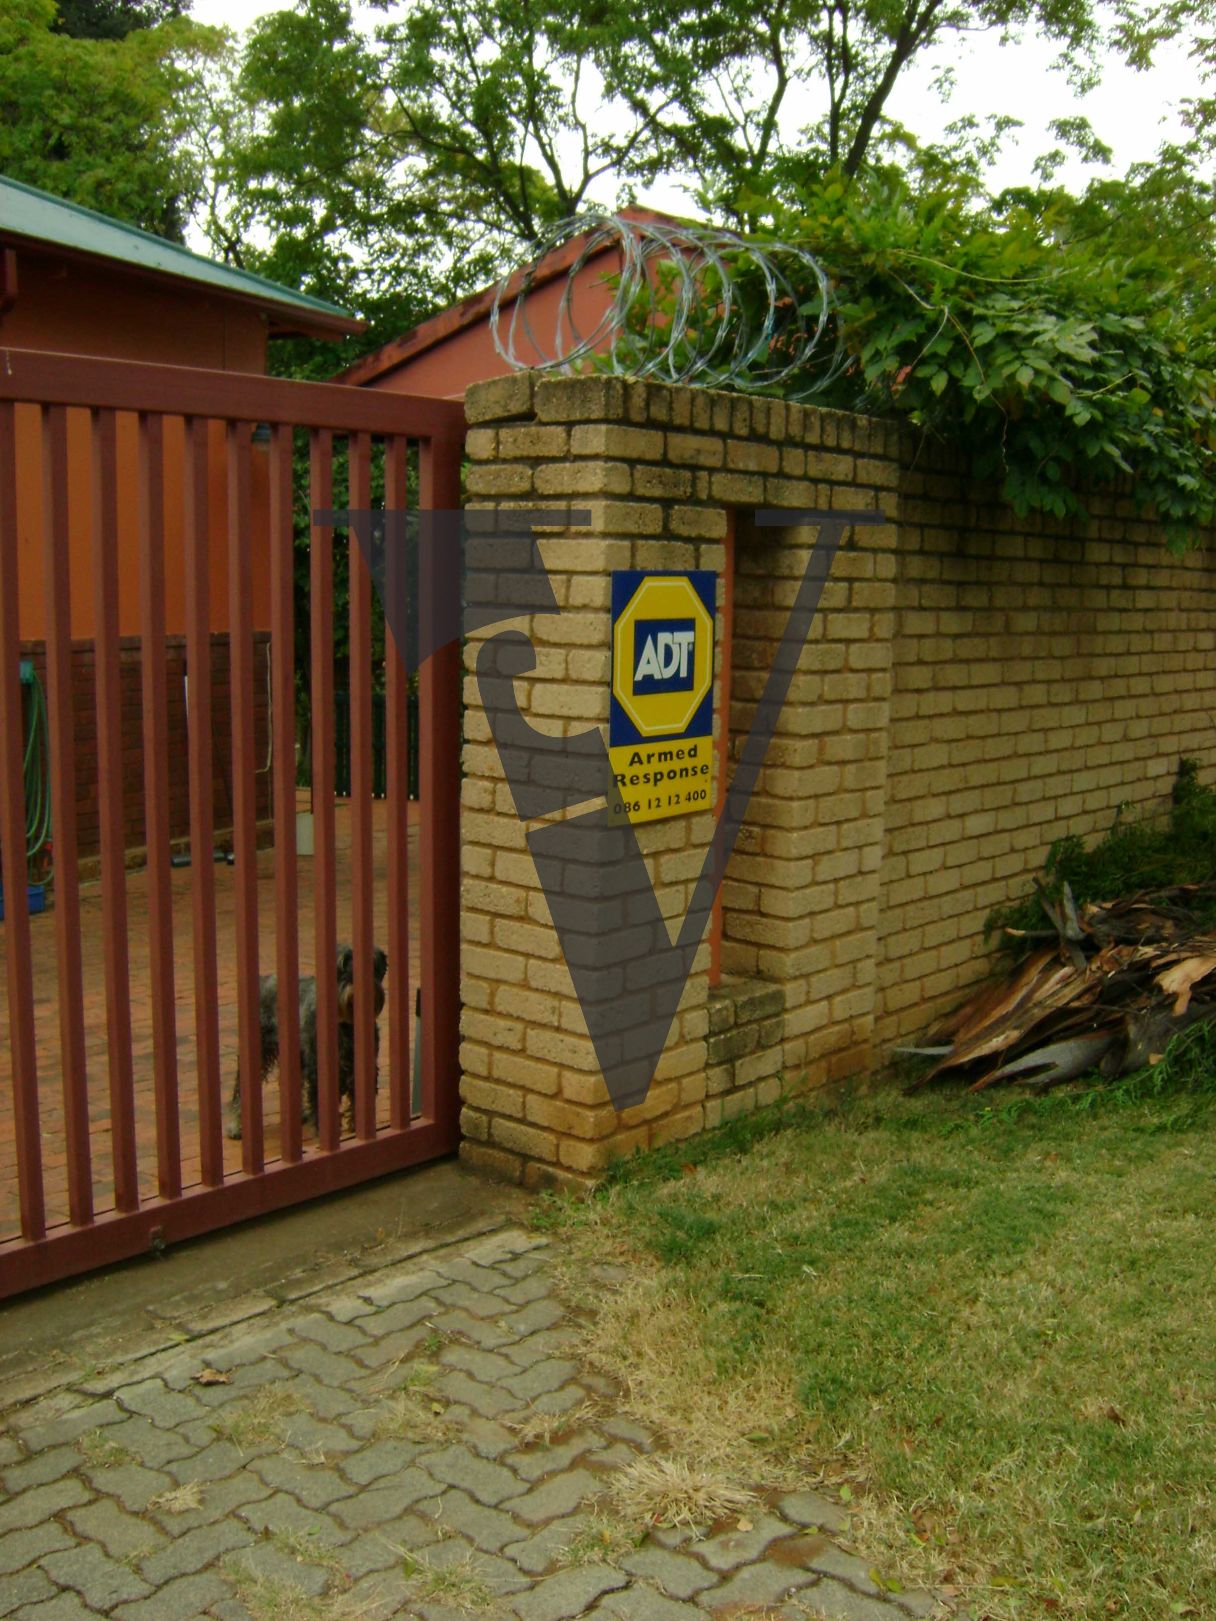 Johannesburg, white dwelling, ADT armed response security sign.